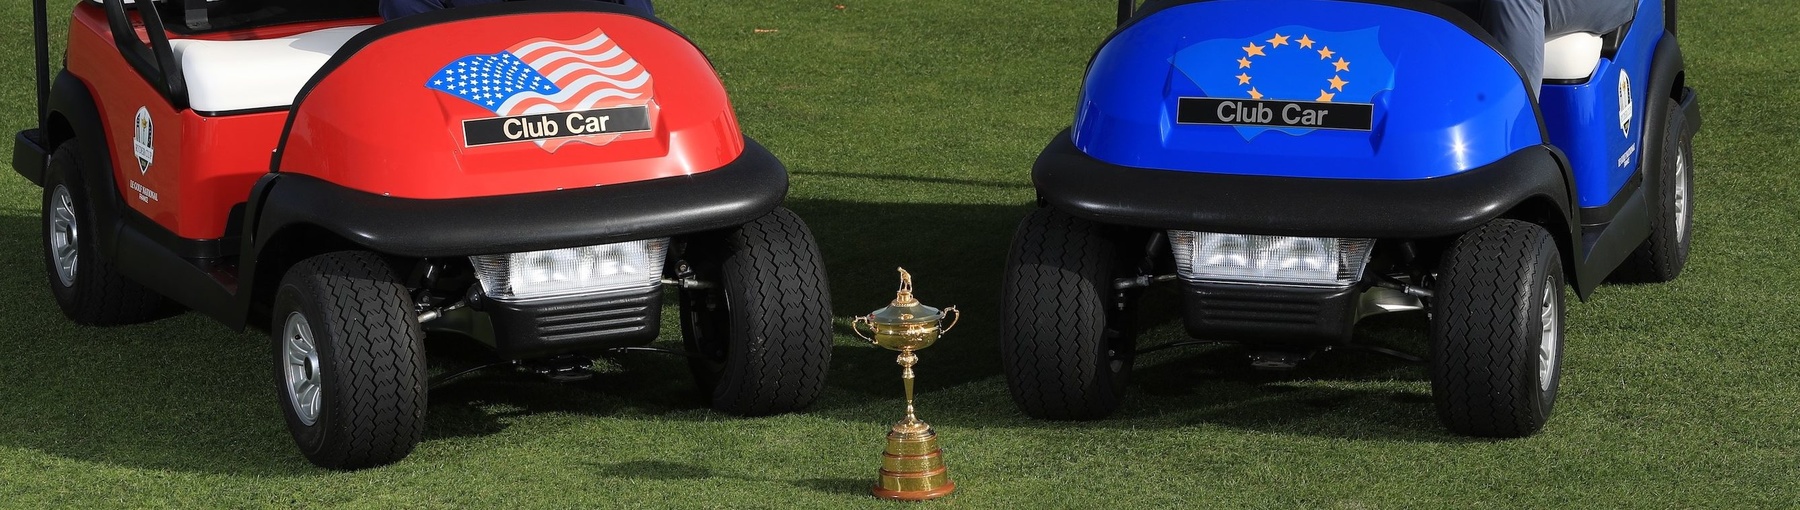 Club CAr ryder Cup capatains